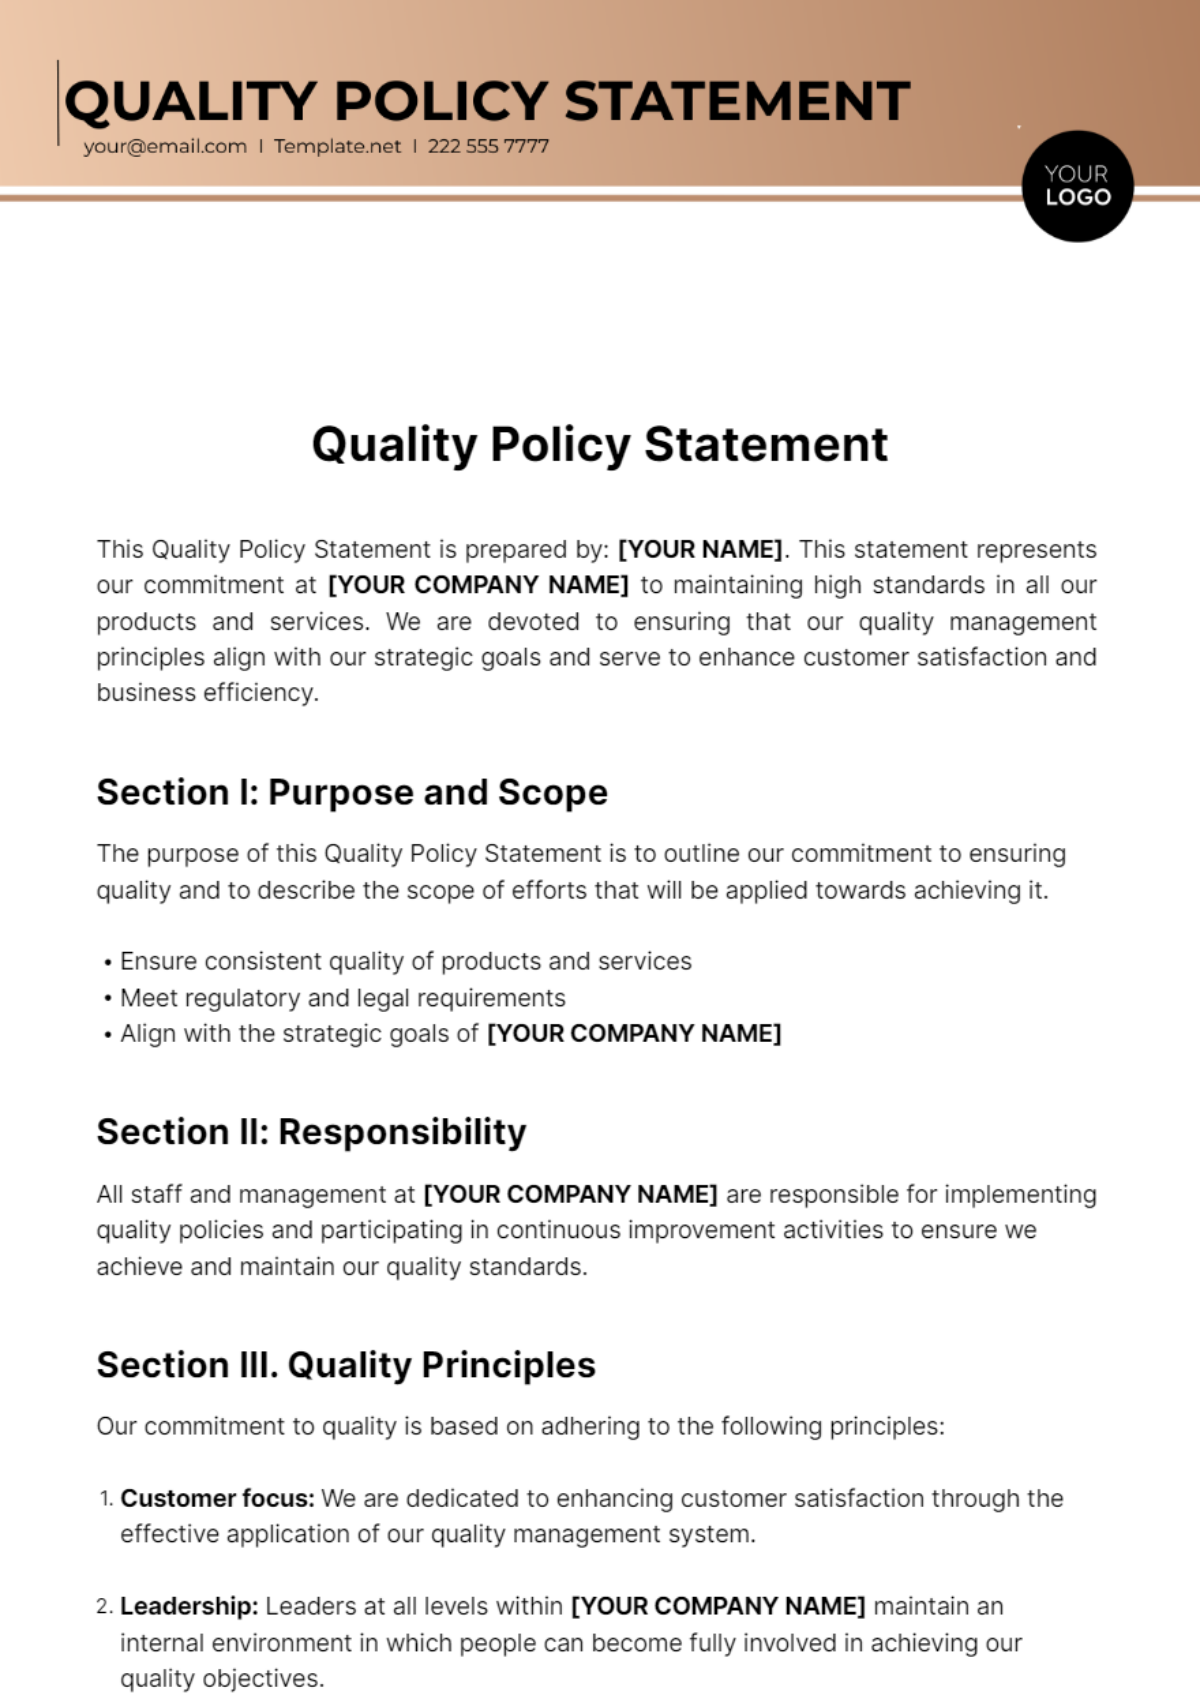 Quality Policy Statement Template